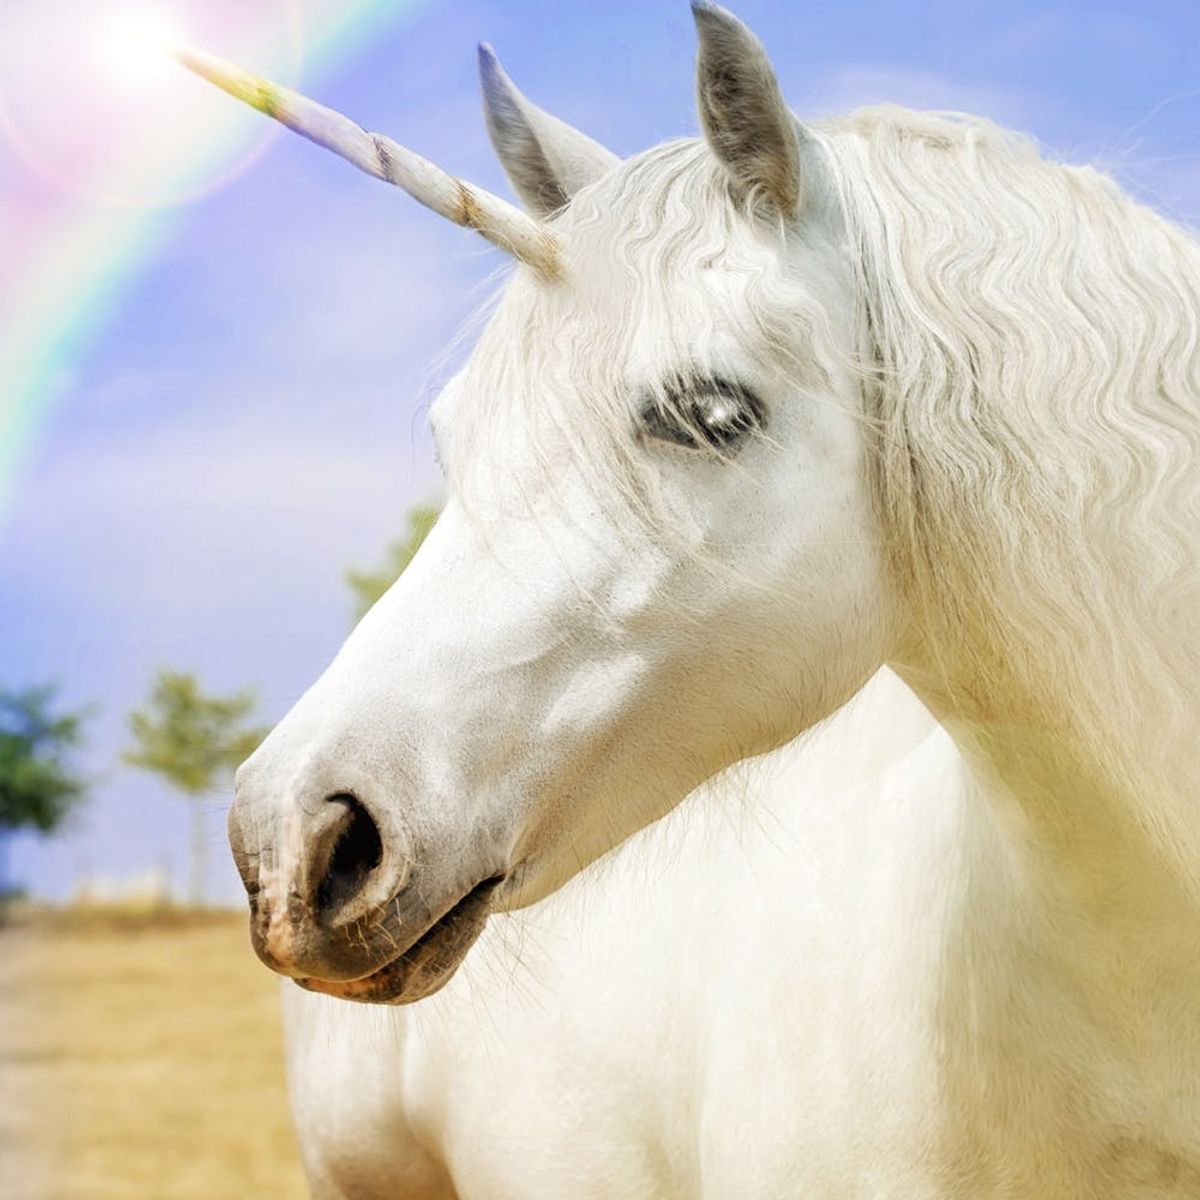 Unicorns Are Real, According to Science